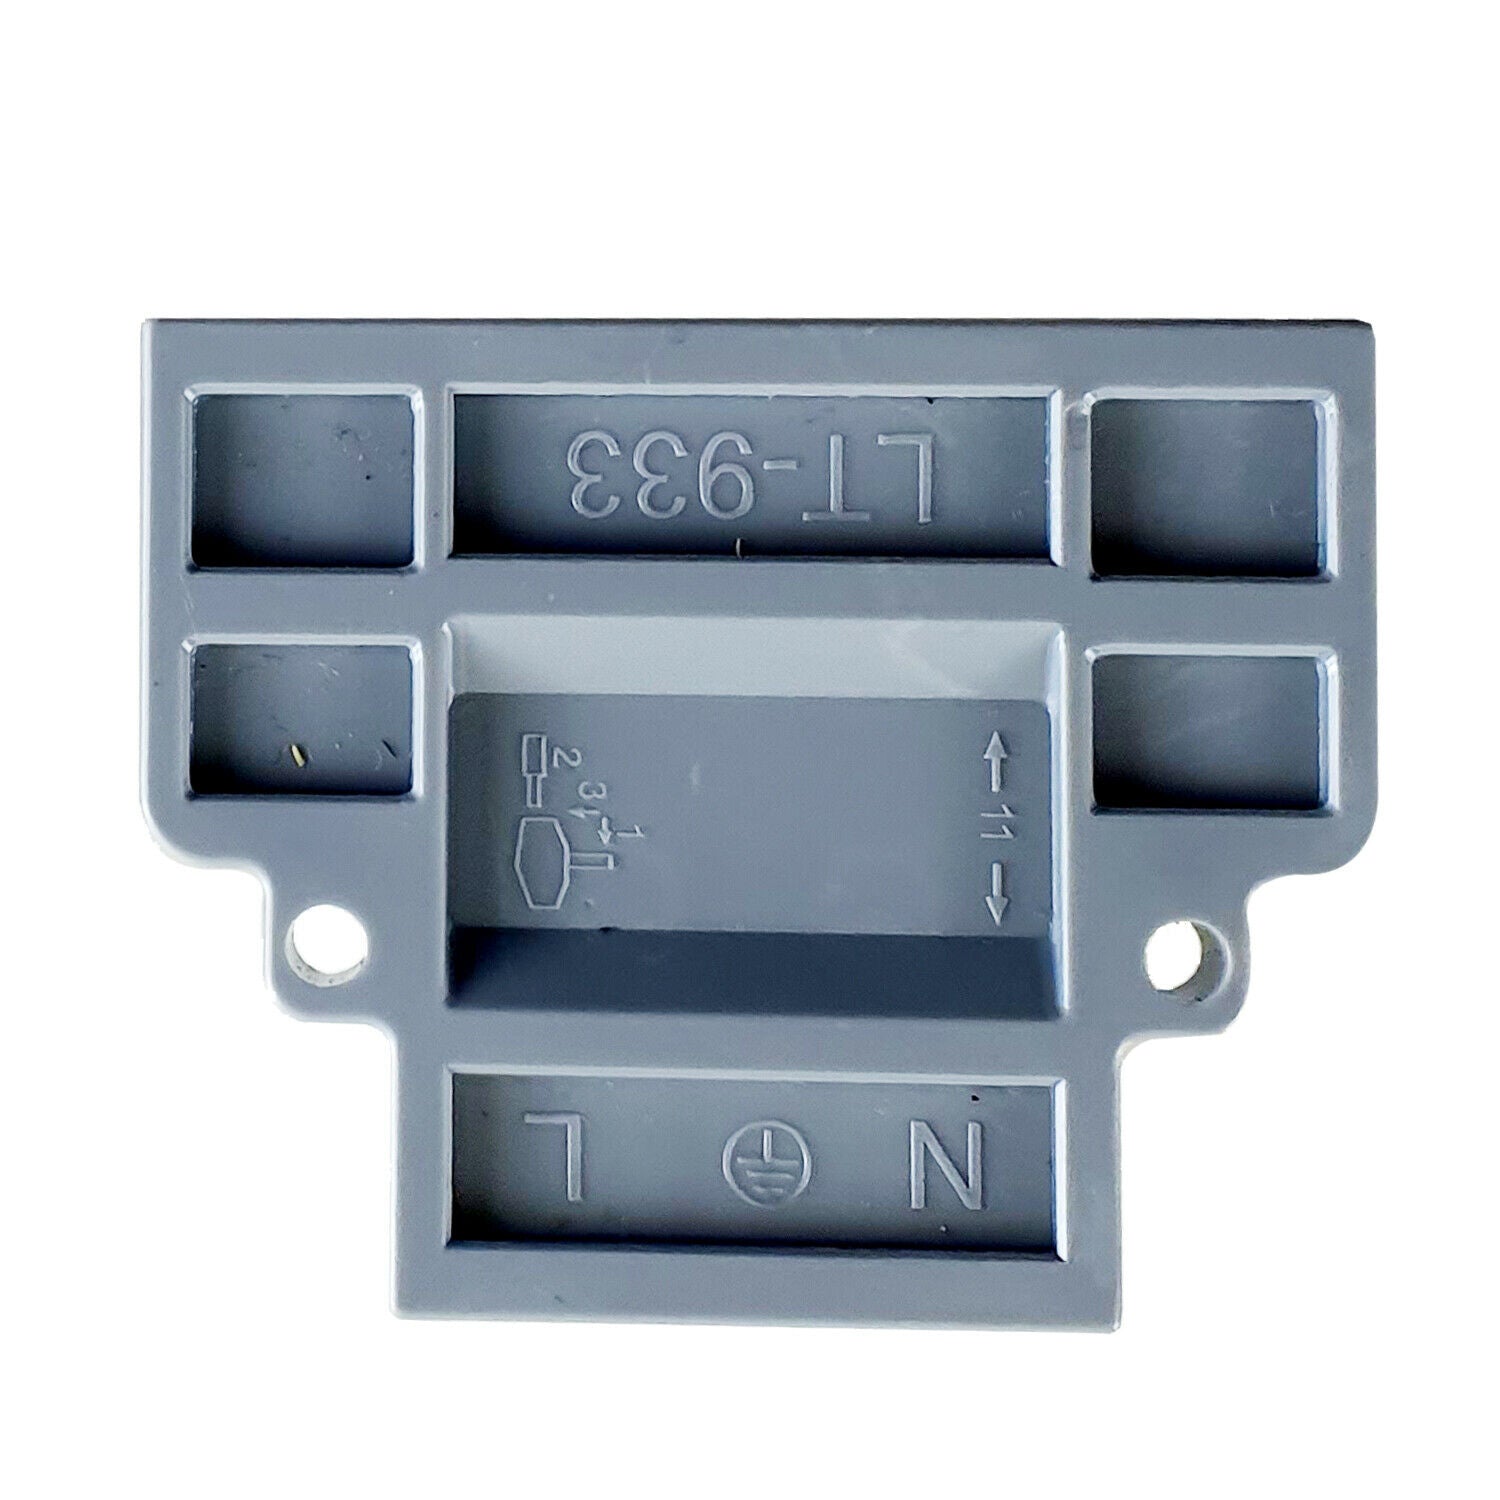 Connector 3to9 Out Wire Splitter Terminal Block Compact Wiring Blocks~1748 - LEDSone UK Ltd